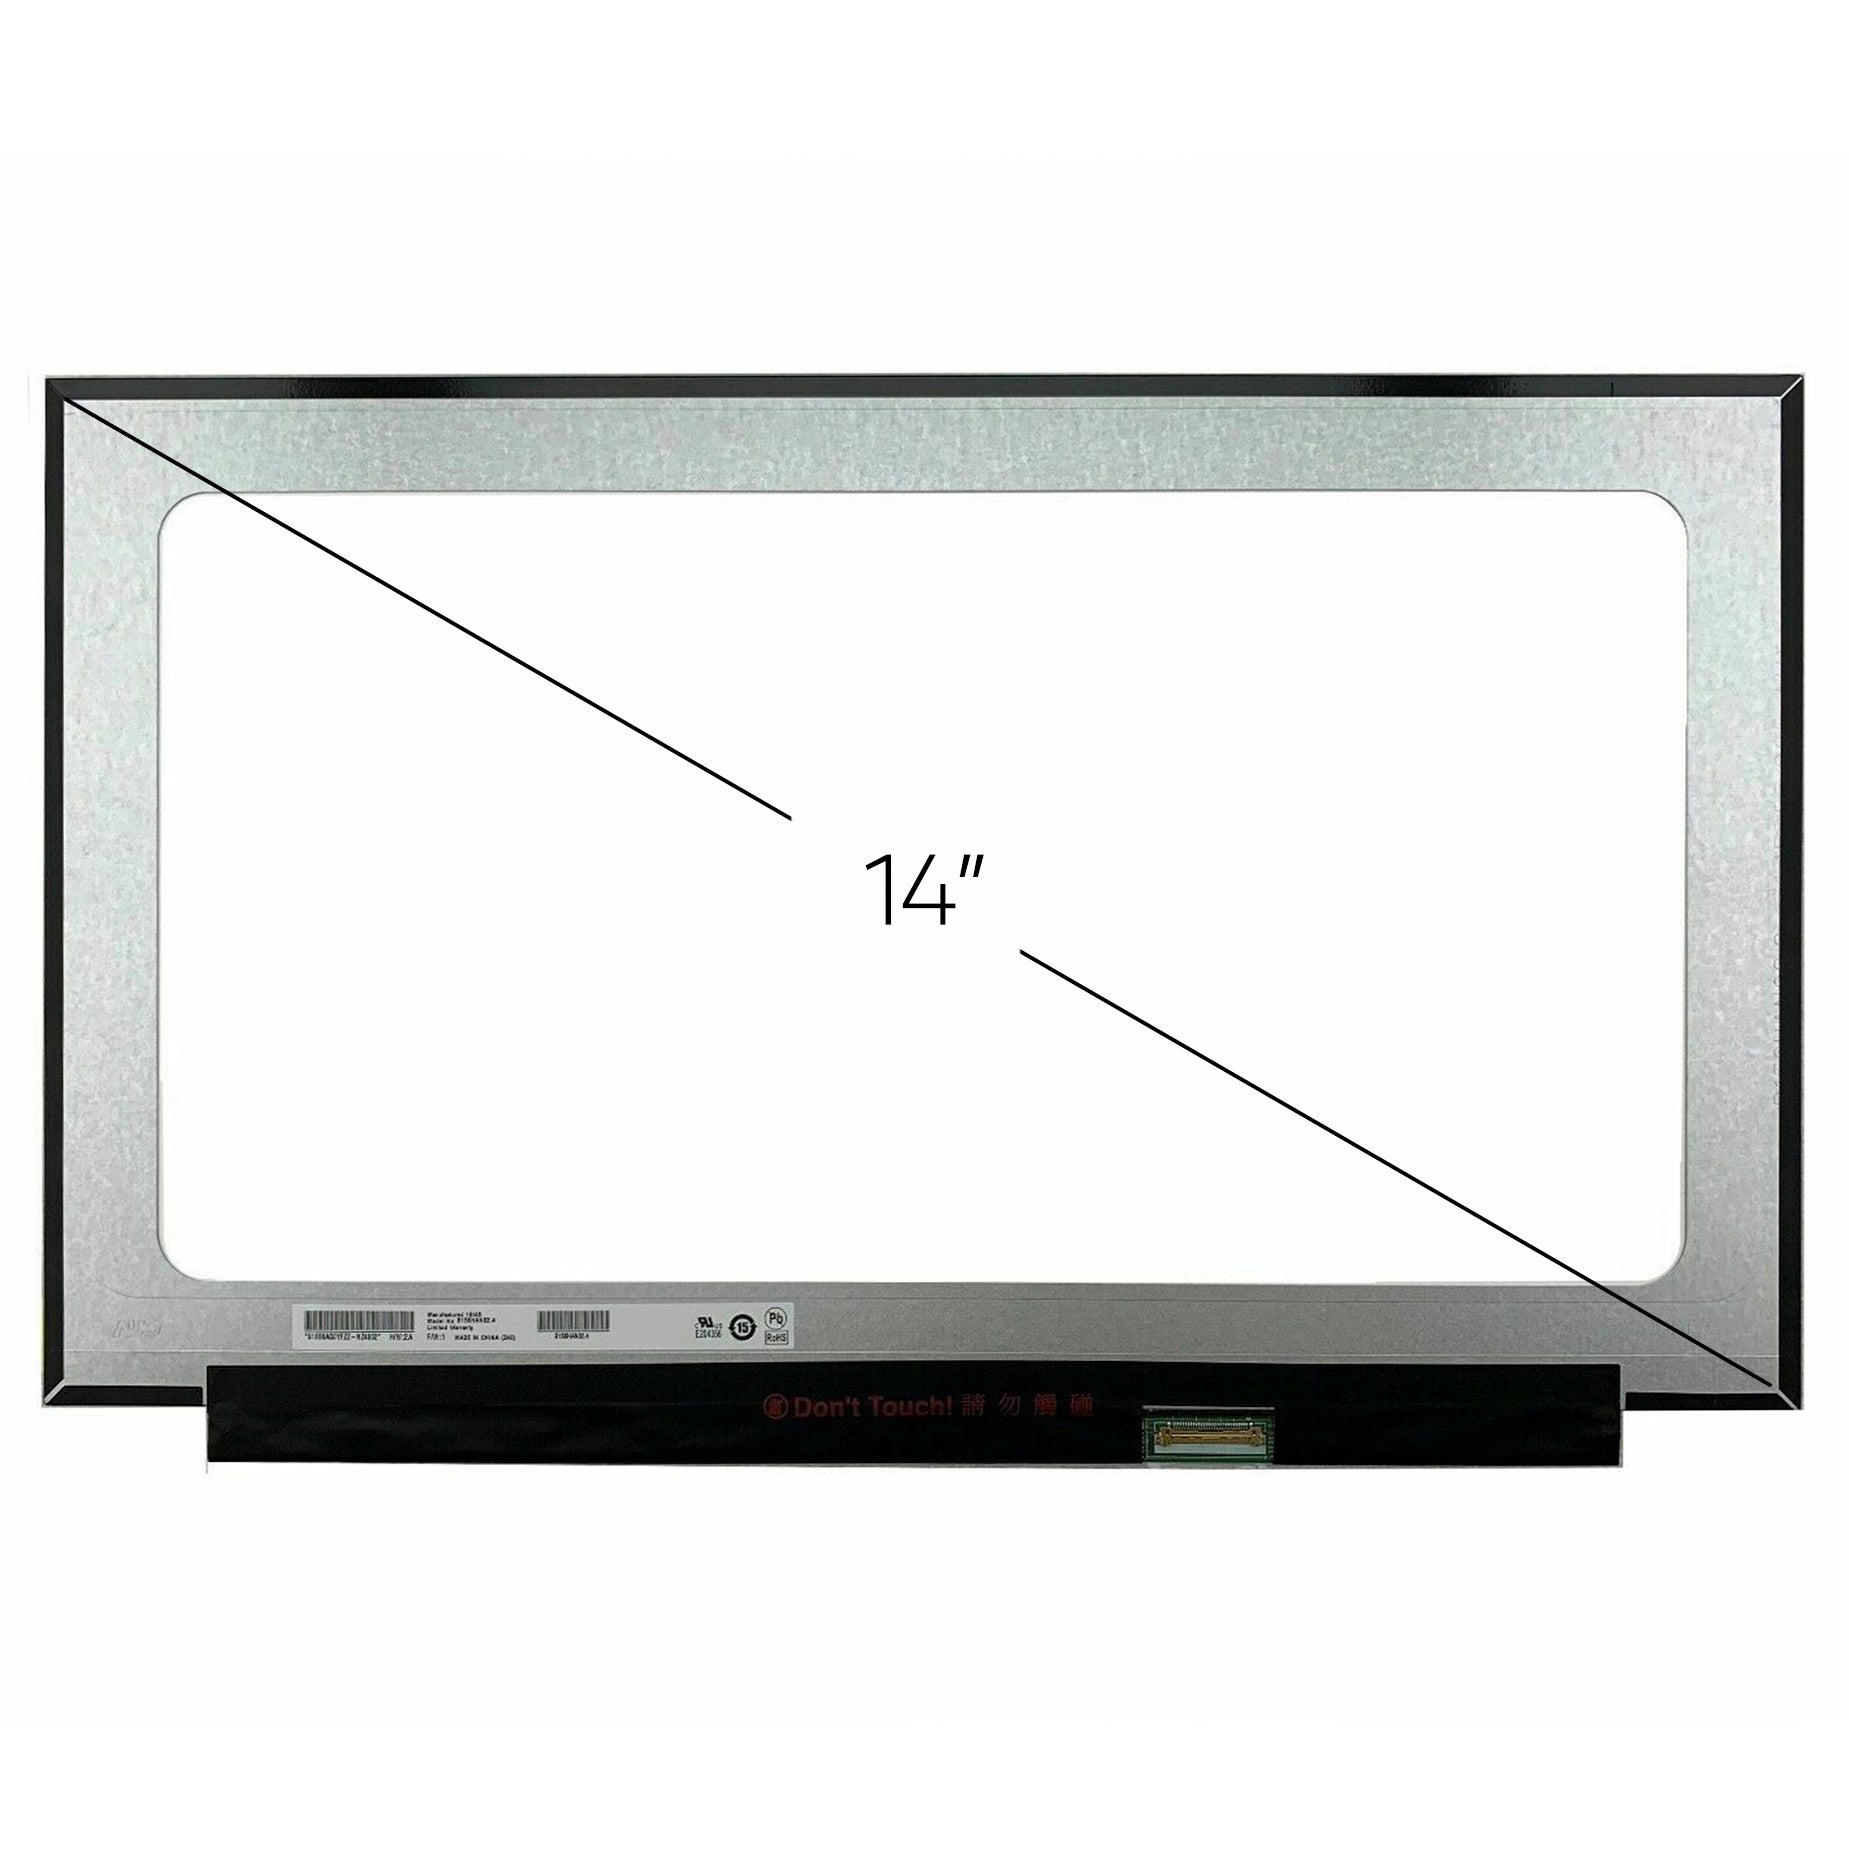 Screen Replacement for Lenovo P/N 5D10M42863 HD 1366x768 LCD LED Display